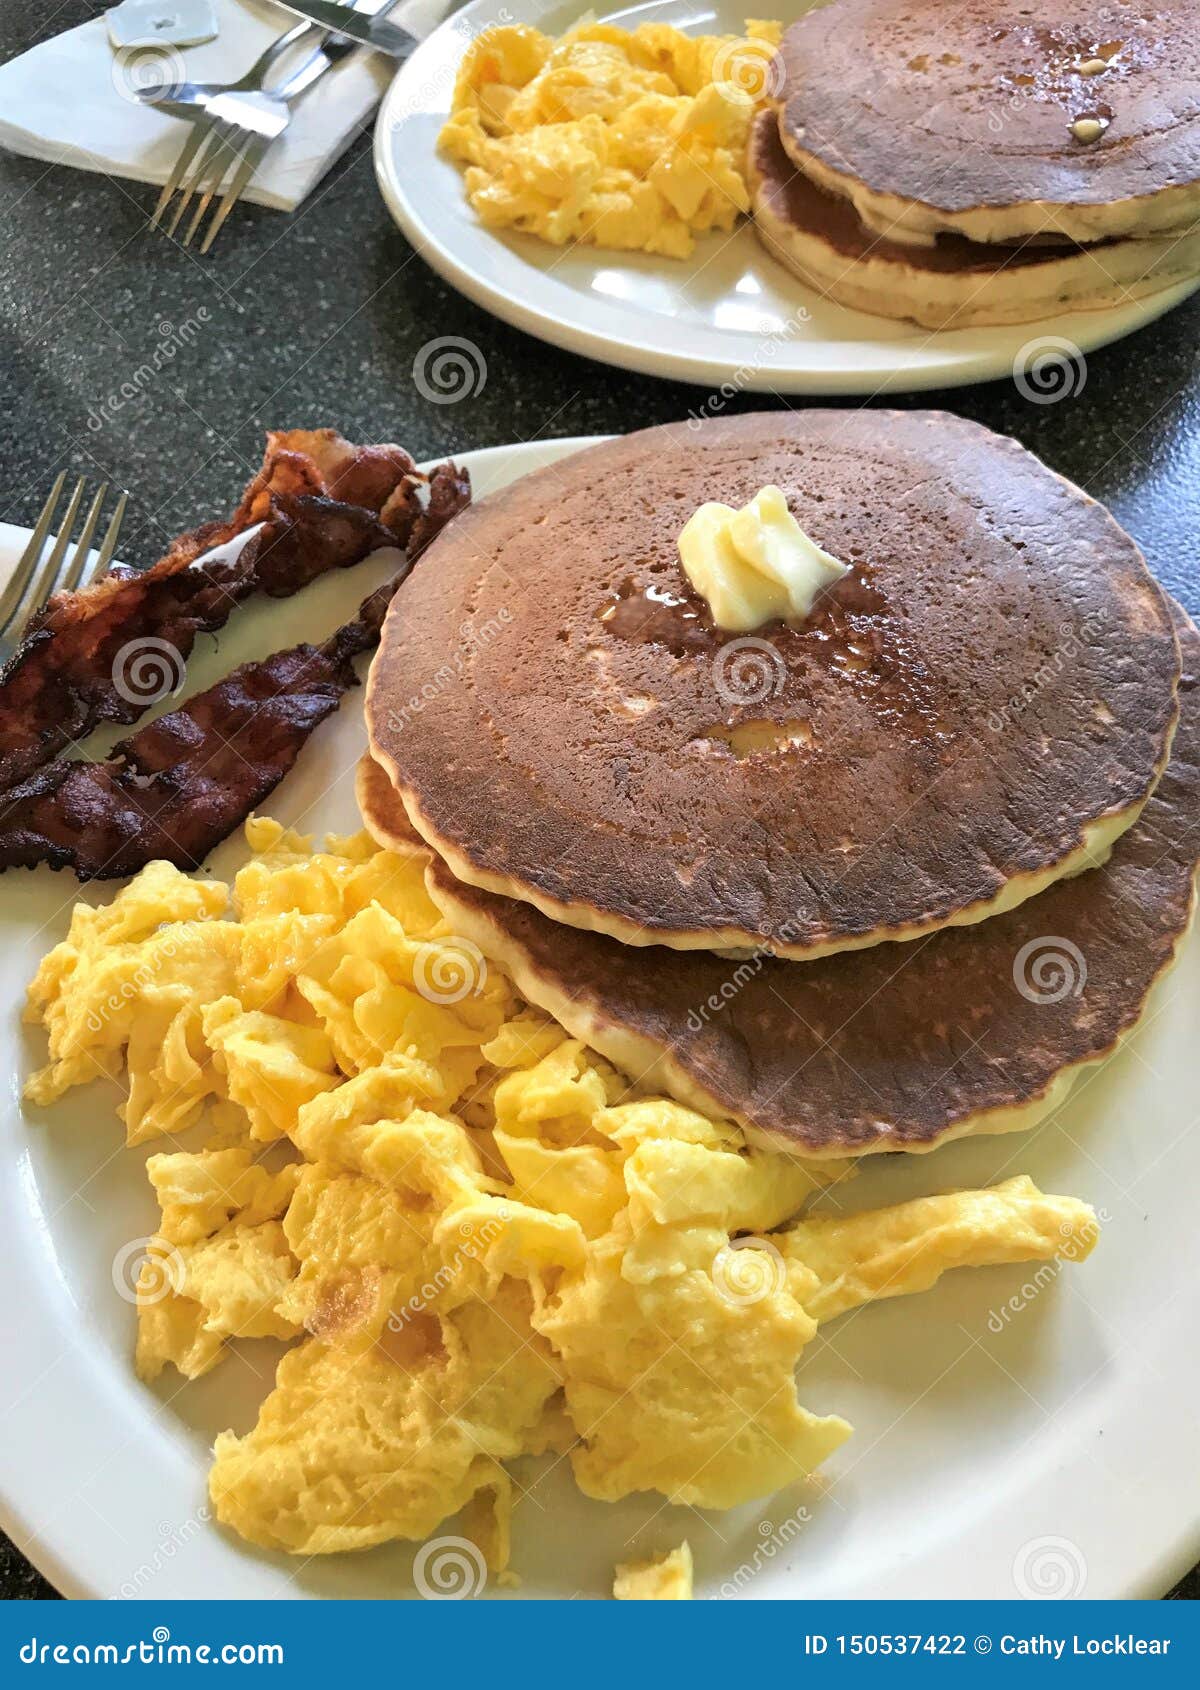 Breakfast Meal with Scrambled Eggs, Bacon and Pancakes Stock Photo ...